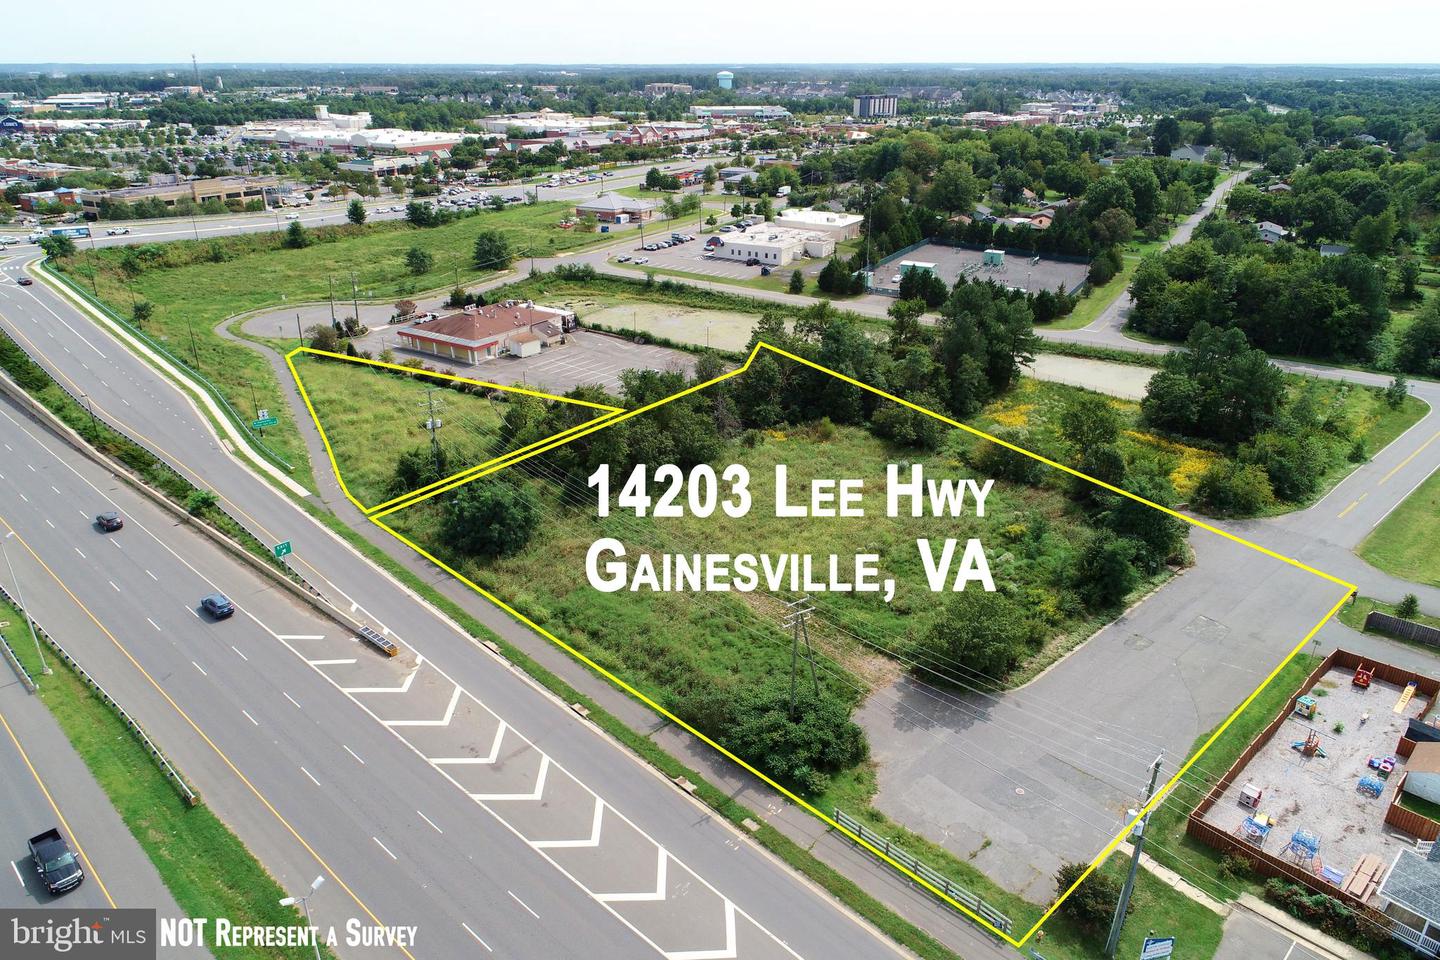 14203 LEE HWY, GAINESVILLE, Virginia 20155, ,Land,For sale,14203 LEE HWY,VAPW2064636 MLS # VAPW2064636